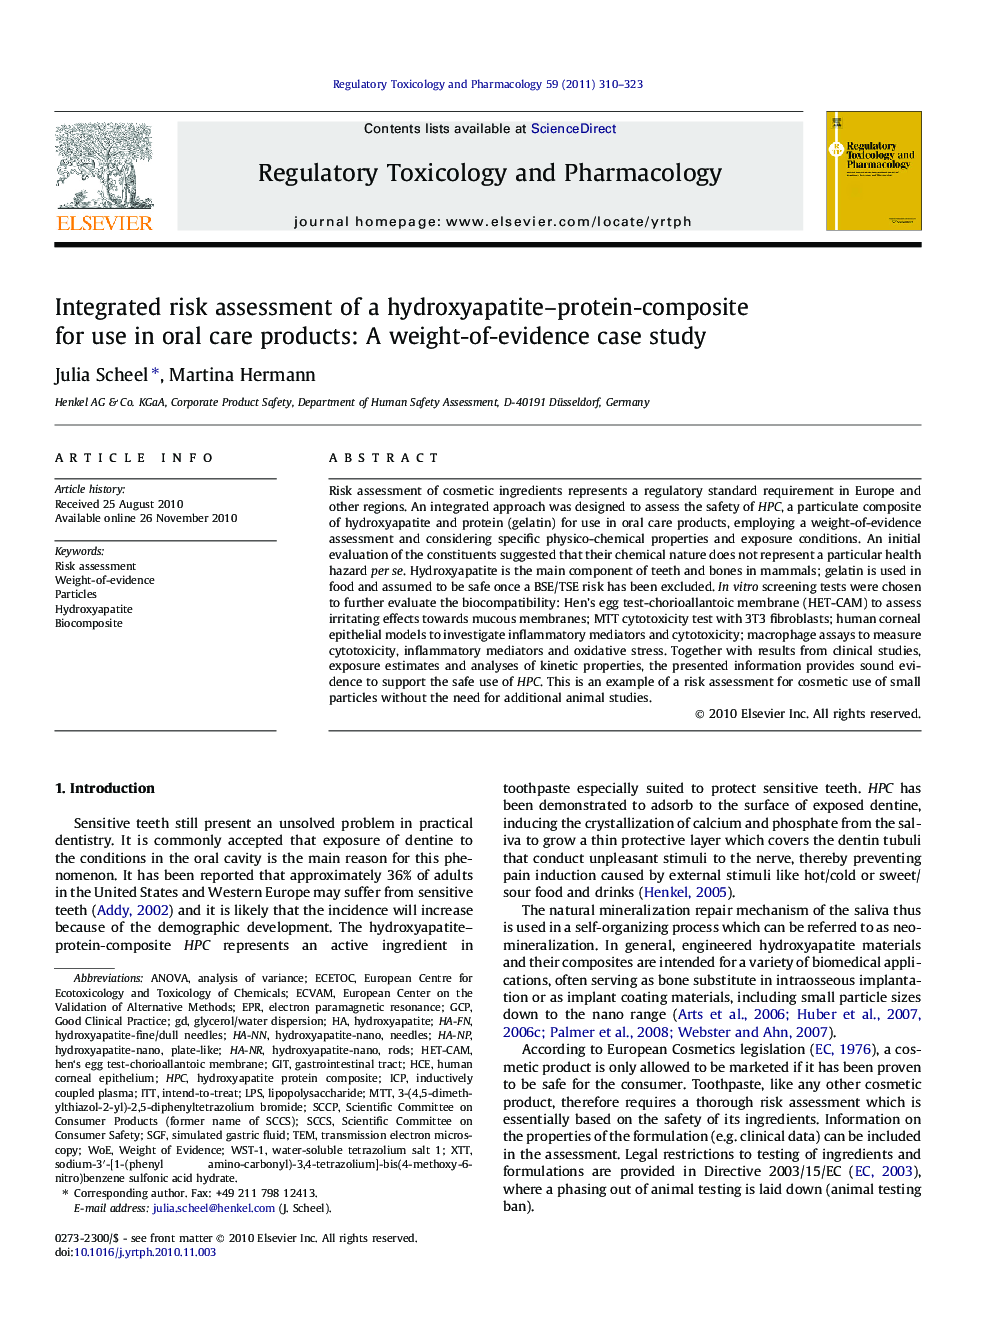 Integrated risk assessment of a hydroxyapatite-protein-composite for use in oral care products: A weight-of-evidence case study